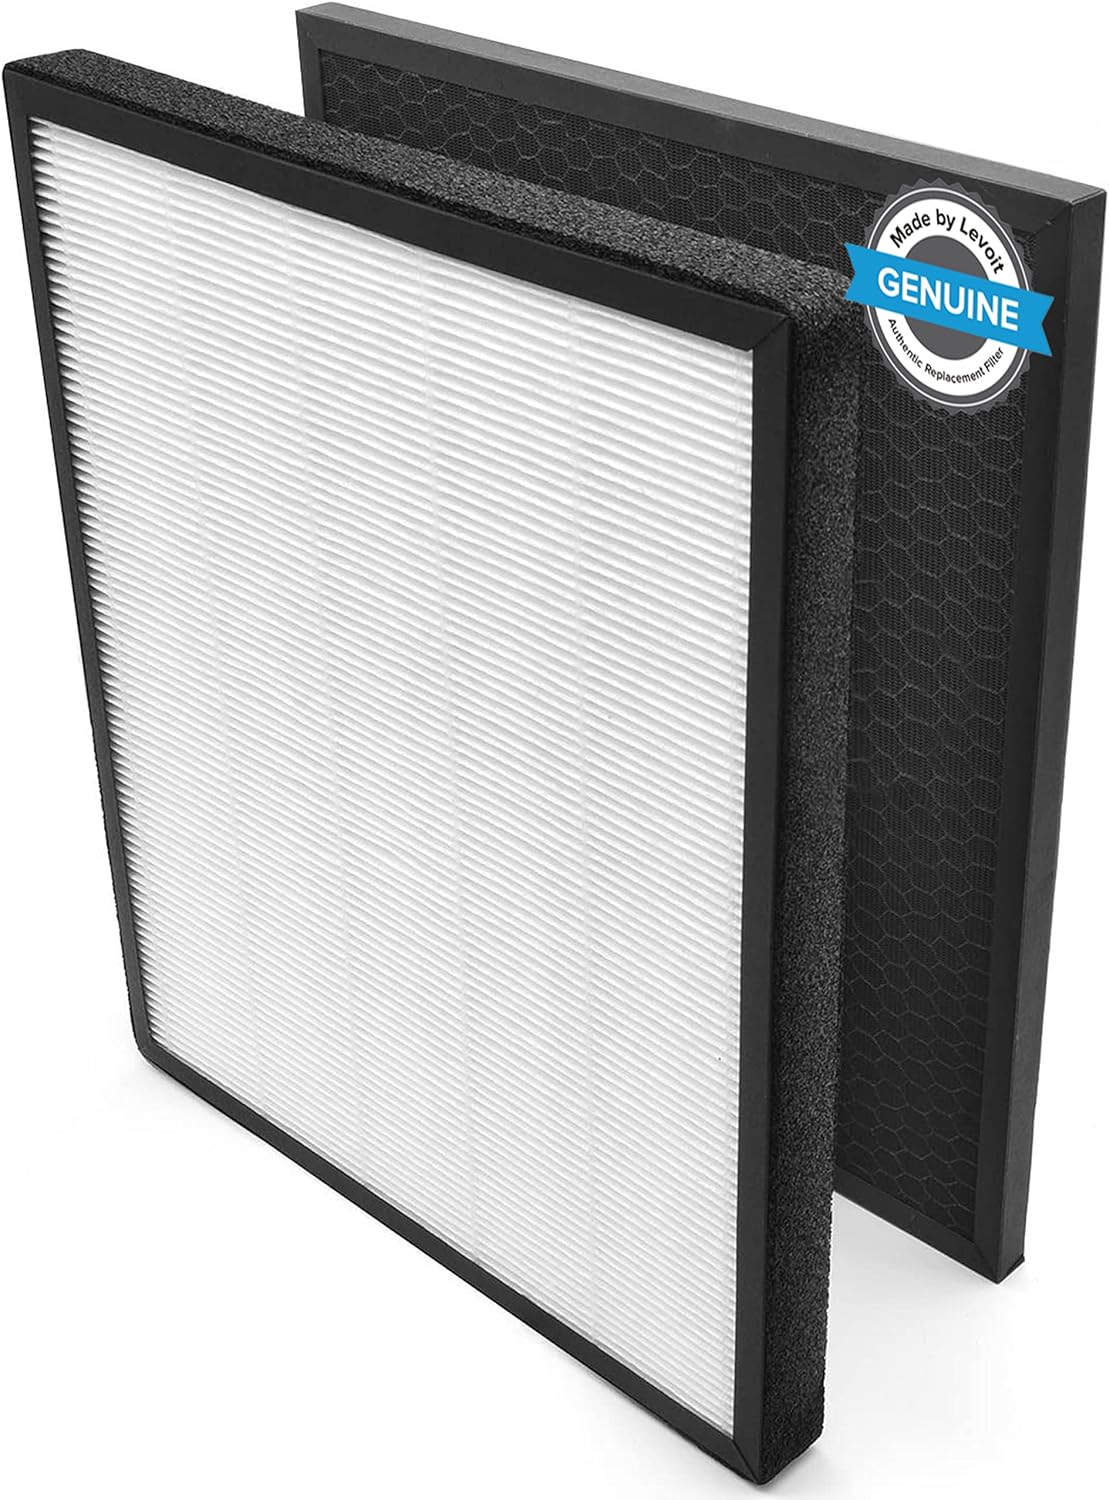 LEVOIT LV-PUR131 Air Purifier Replacement Filter, Hepa and Activated Carbon Filters Set, LV-PUR131-RF, 1 Pack